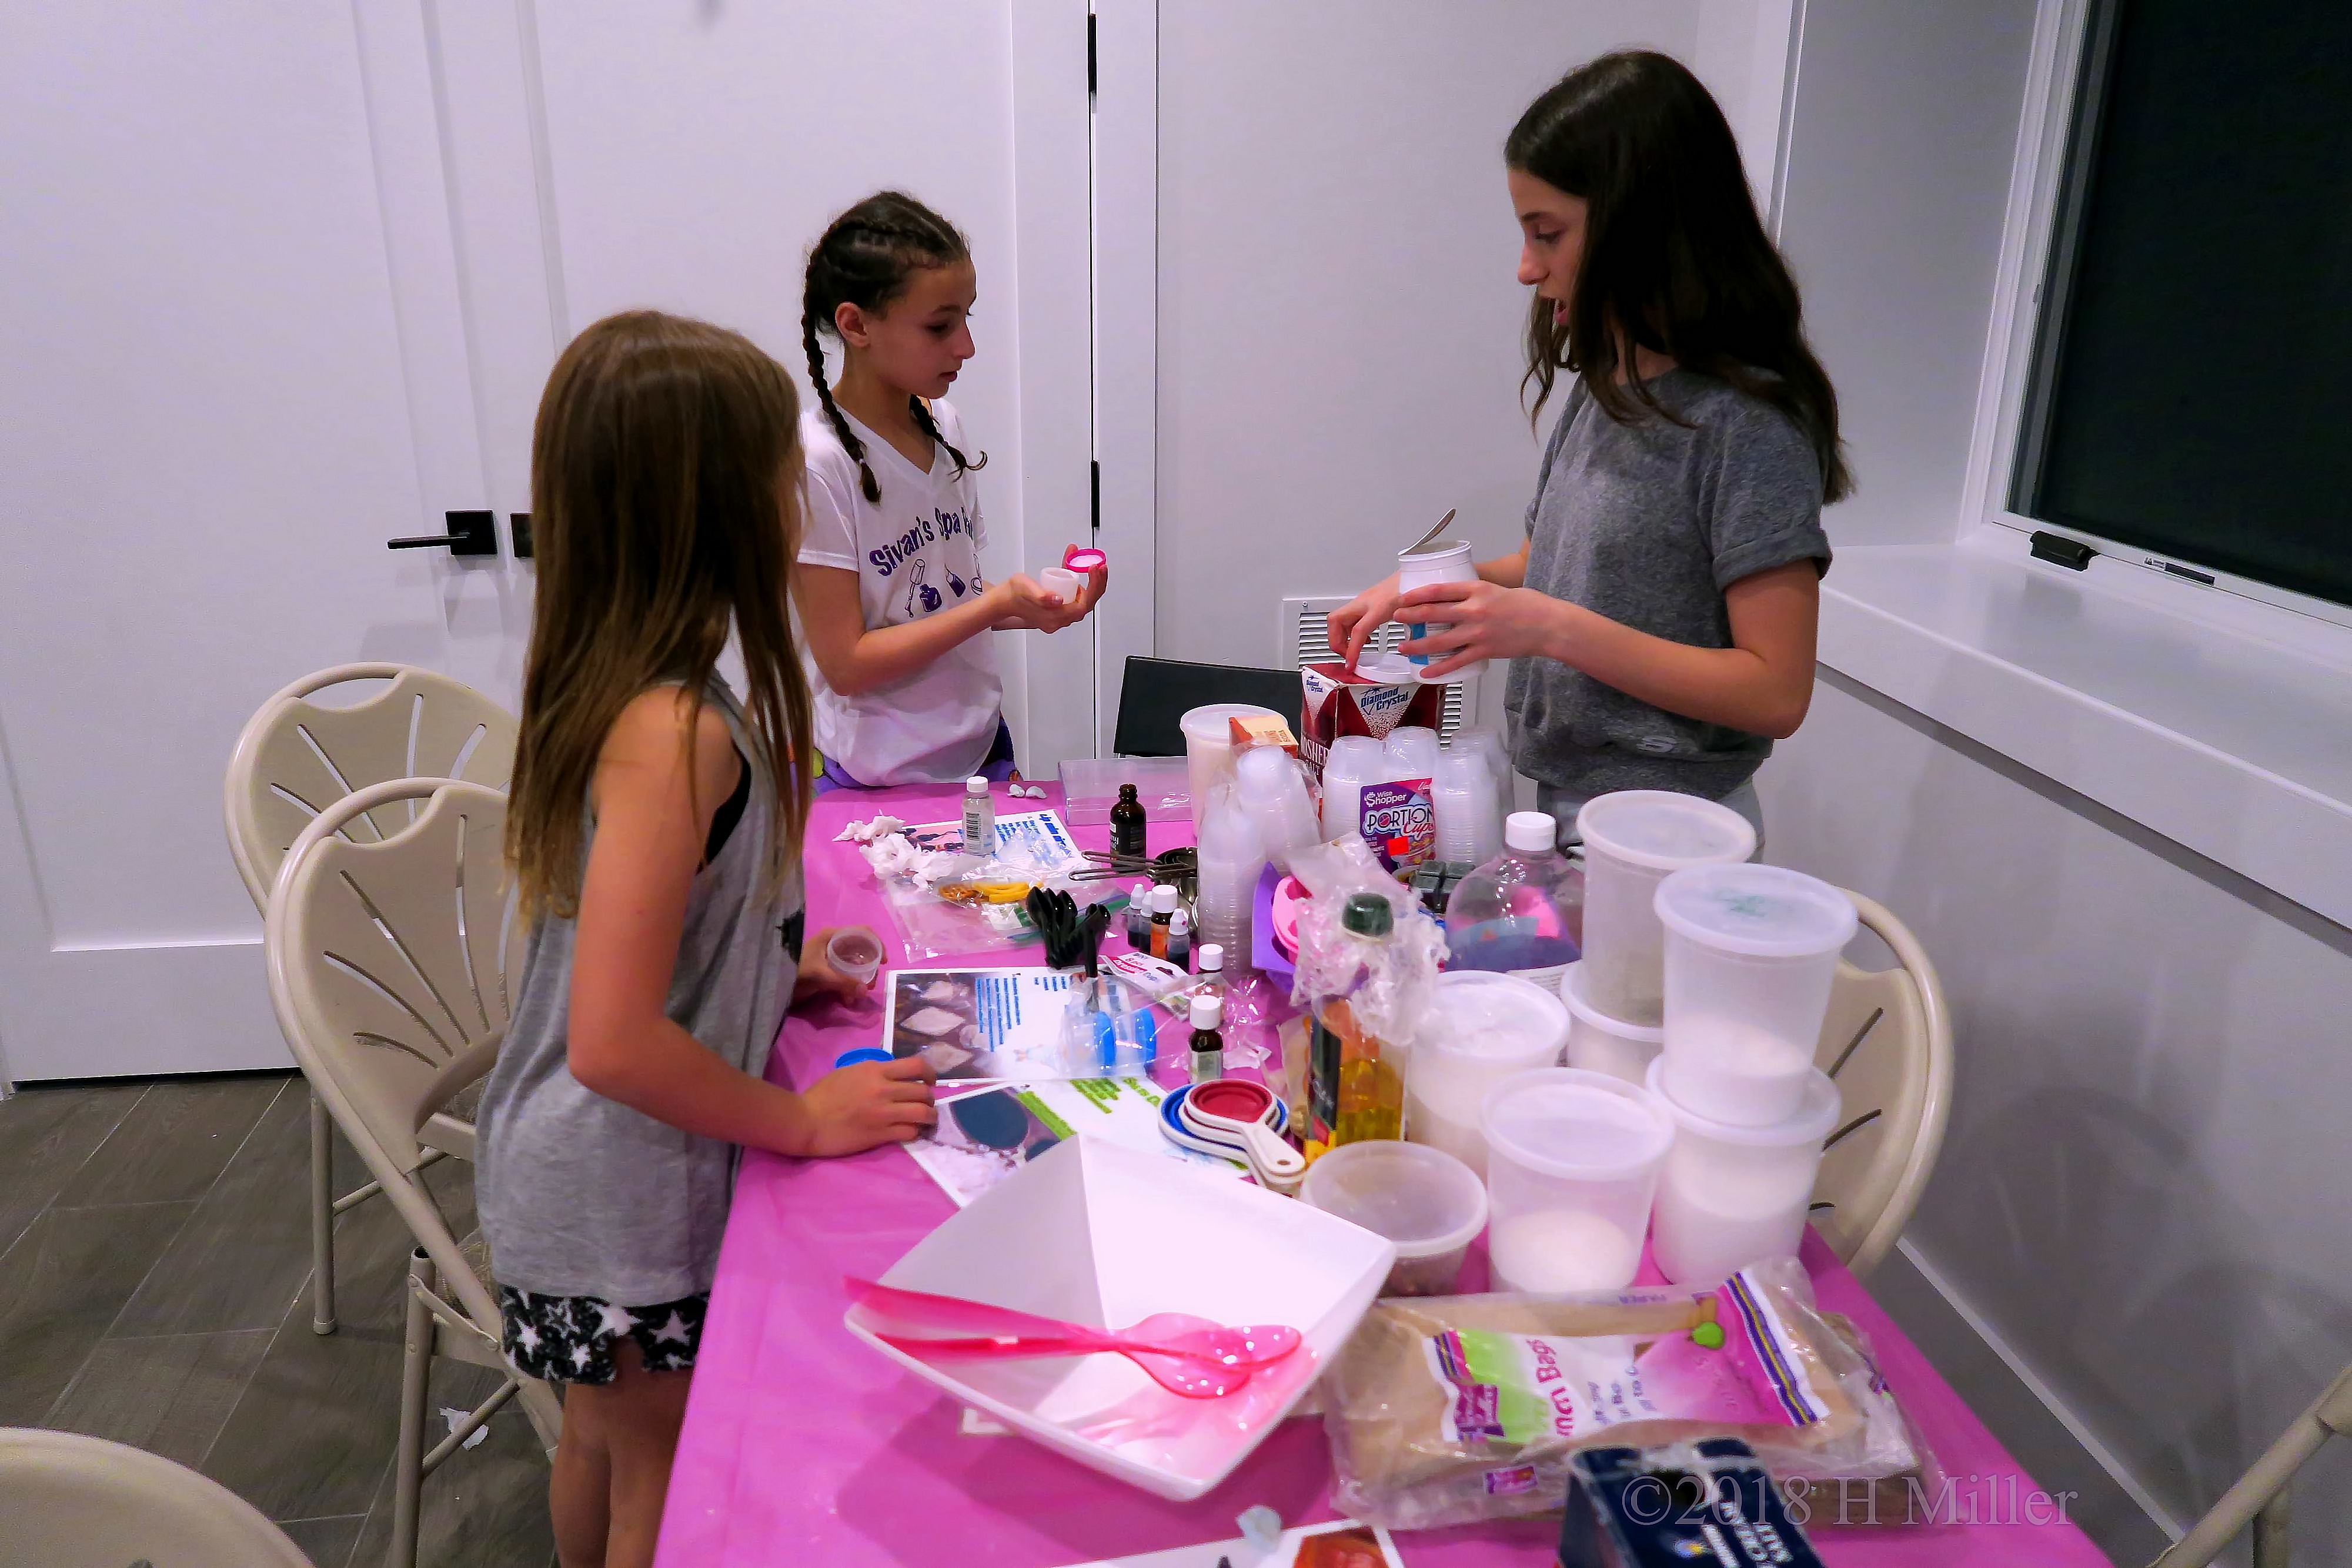 Making Craft Items At The Crafts For Kids Station 